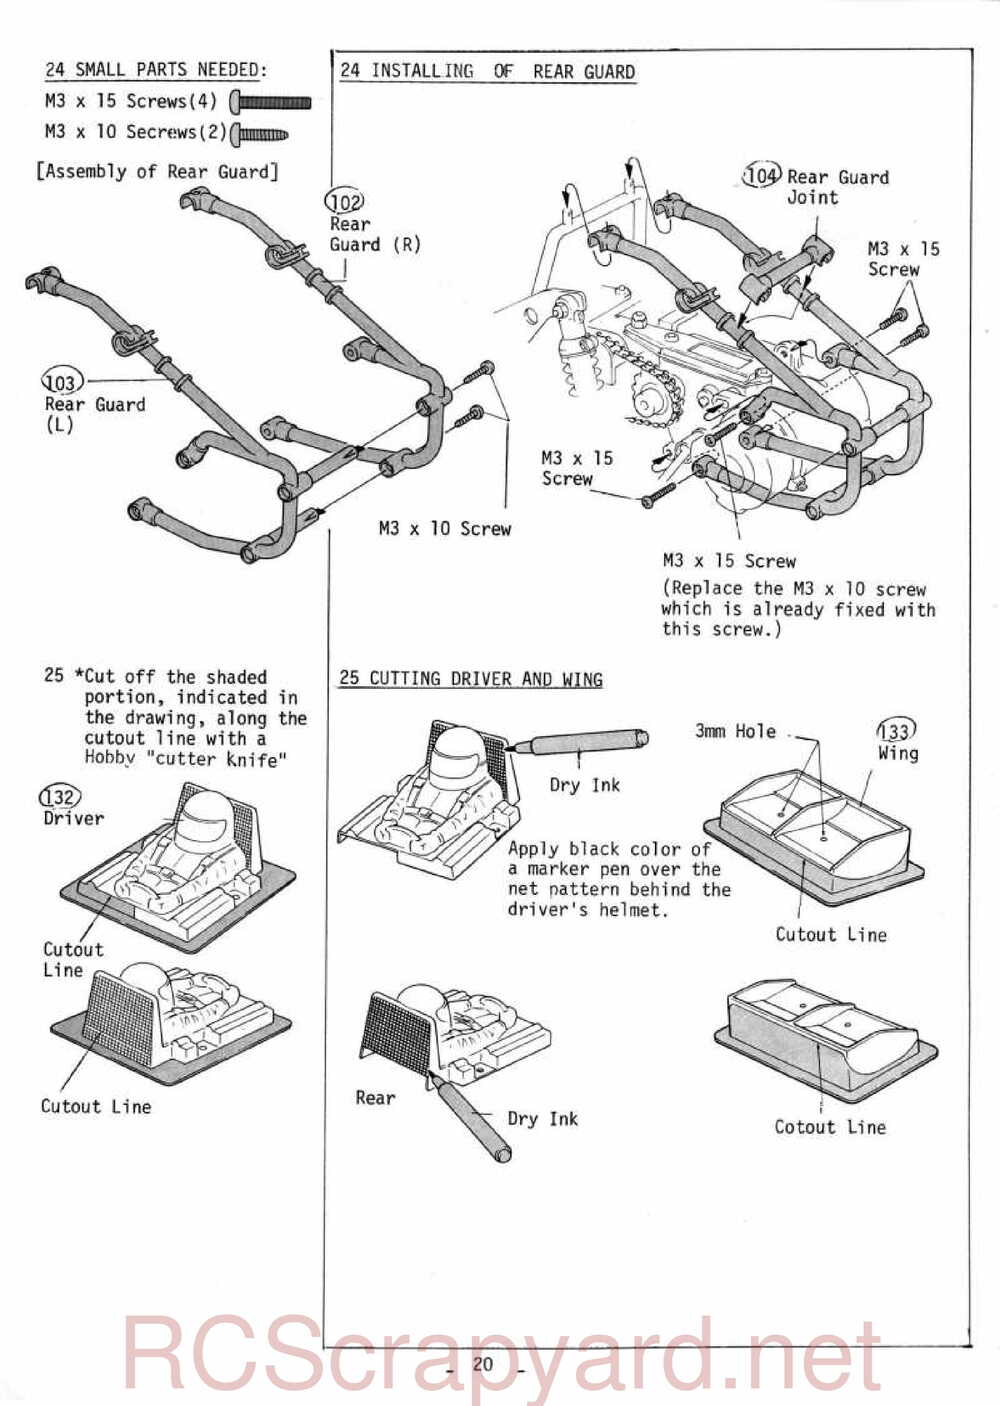 Kyosho - 3069 - Gallop MkII - Manual - Page 20